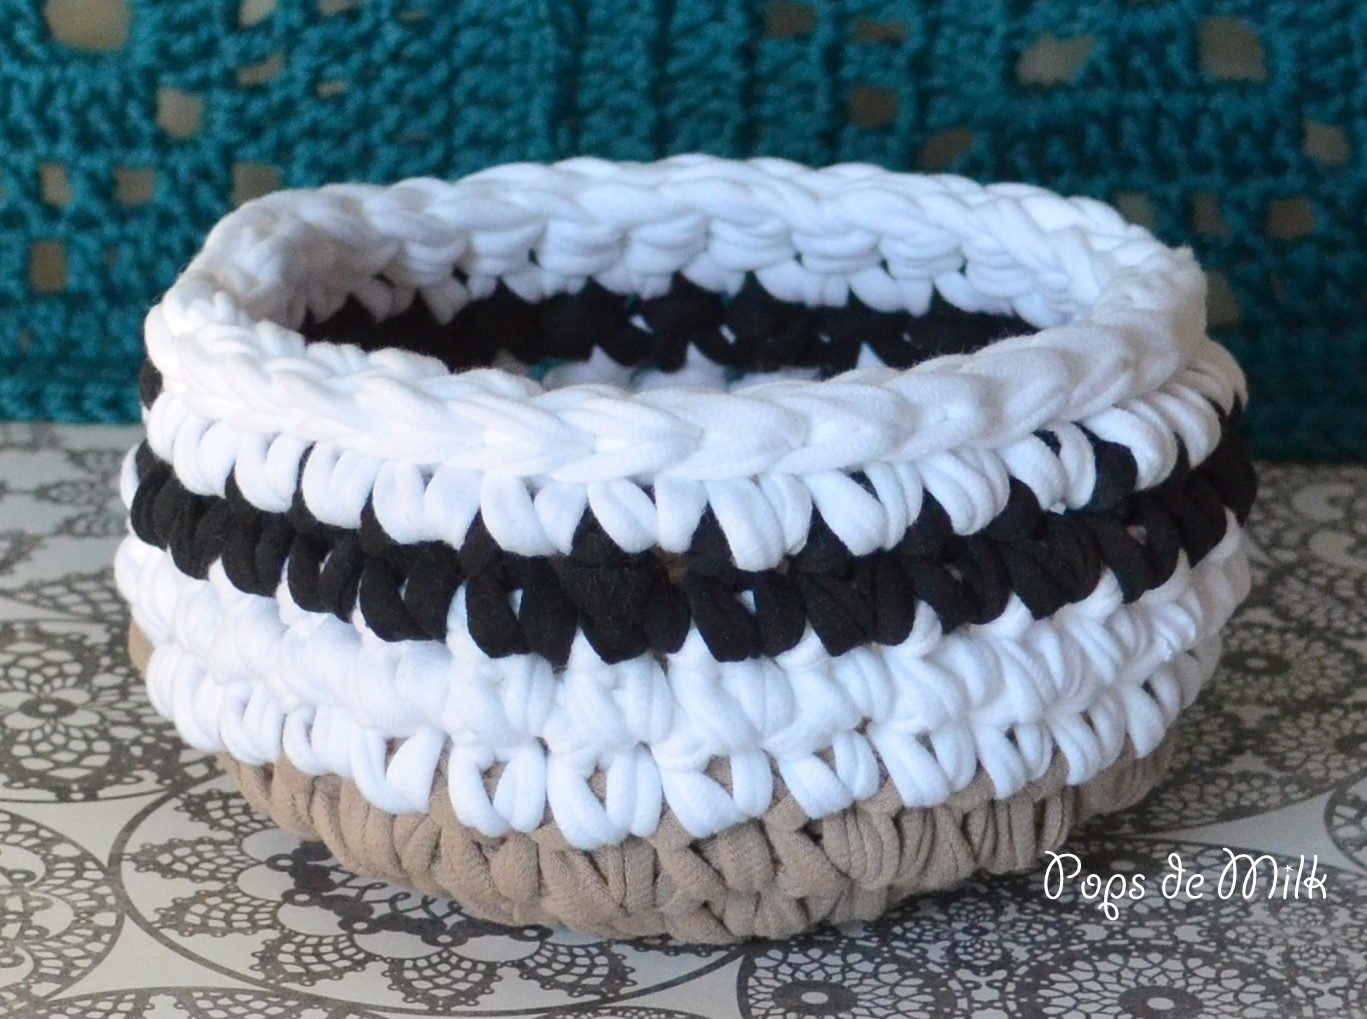 Quick and Easy Crochet Yarn Bowl // Make your own yarn bowl